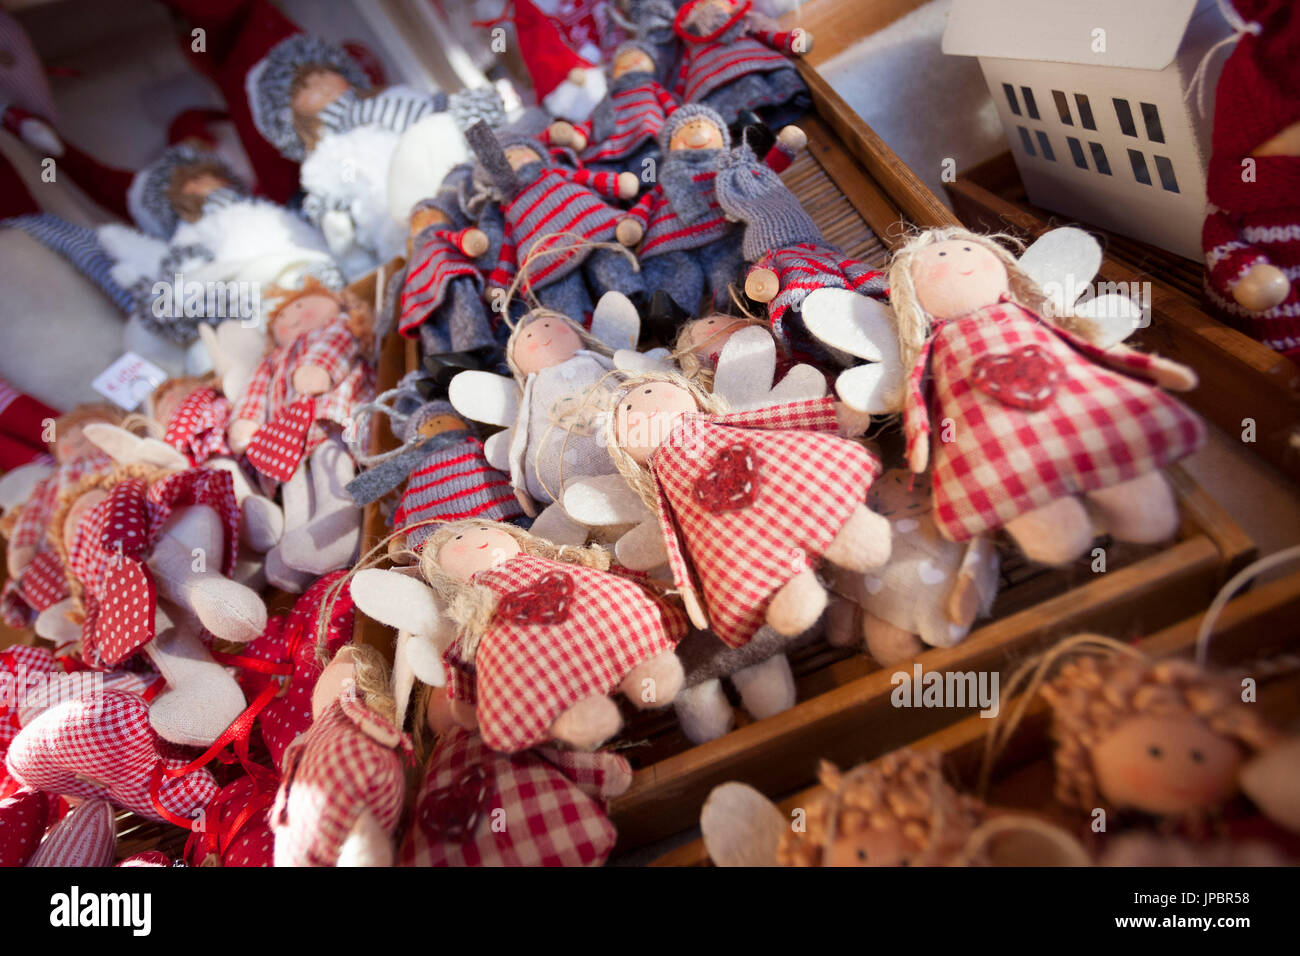 a close up of a typical tyroler gadget sold during the Christmas market in the city of Brixen, Bolzano province, South Tyrol, Trentino Alto Adige, Italy, Europe Stock Photo